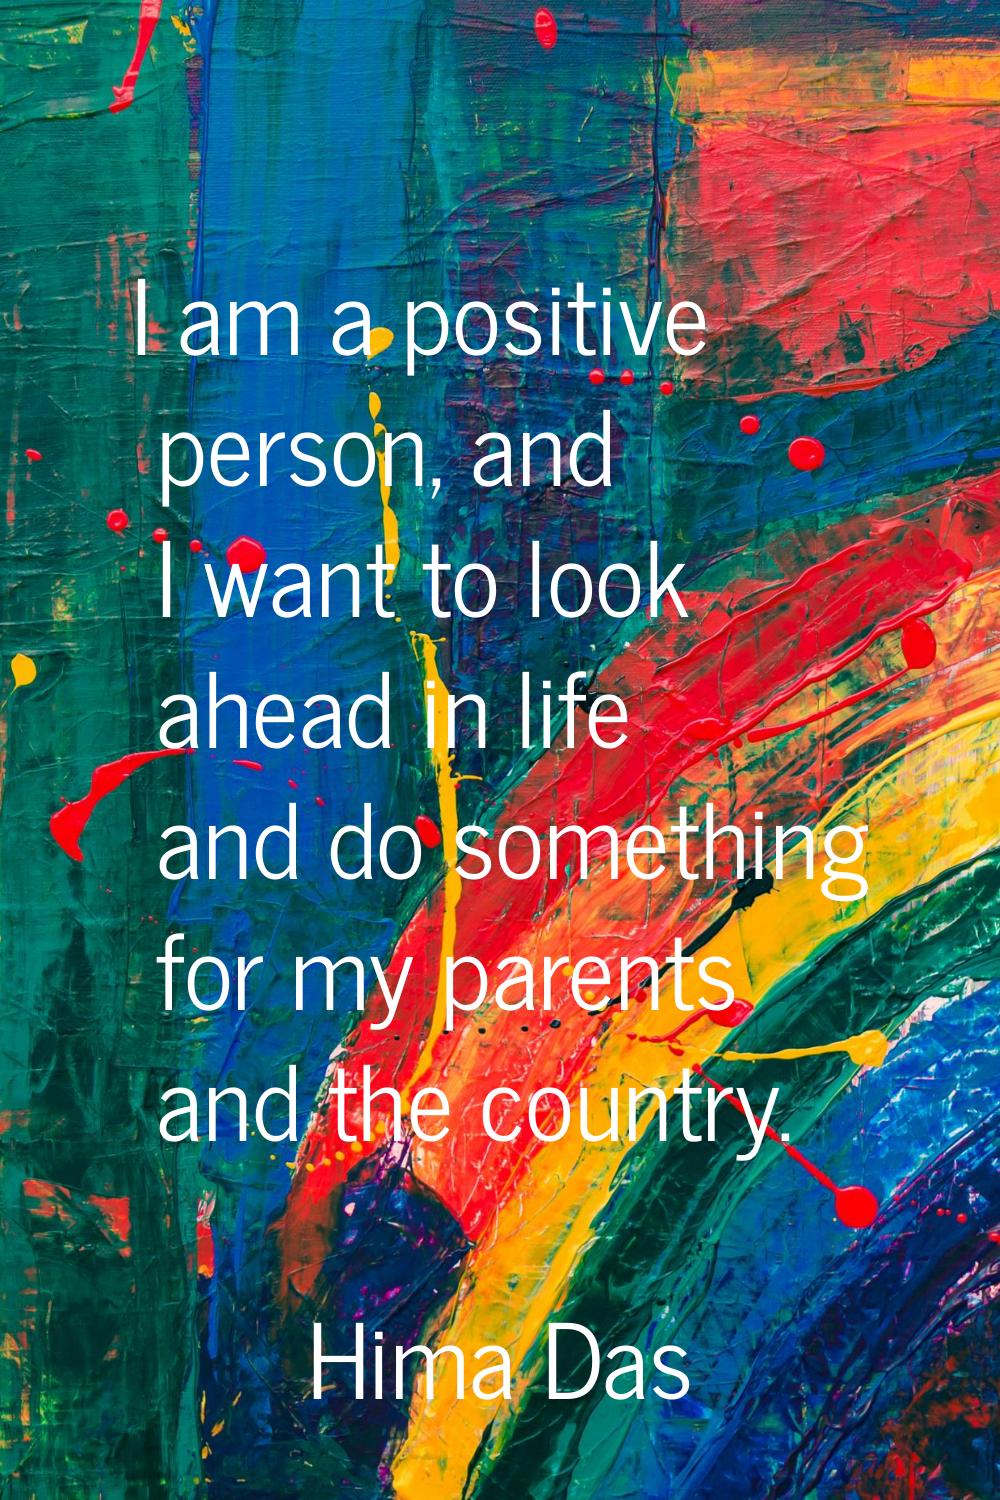 I am a positive person, and I want to look ahead in life and do something for my parents and the co